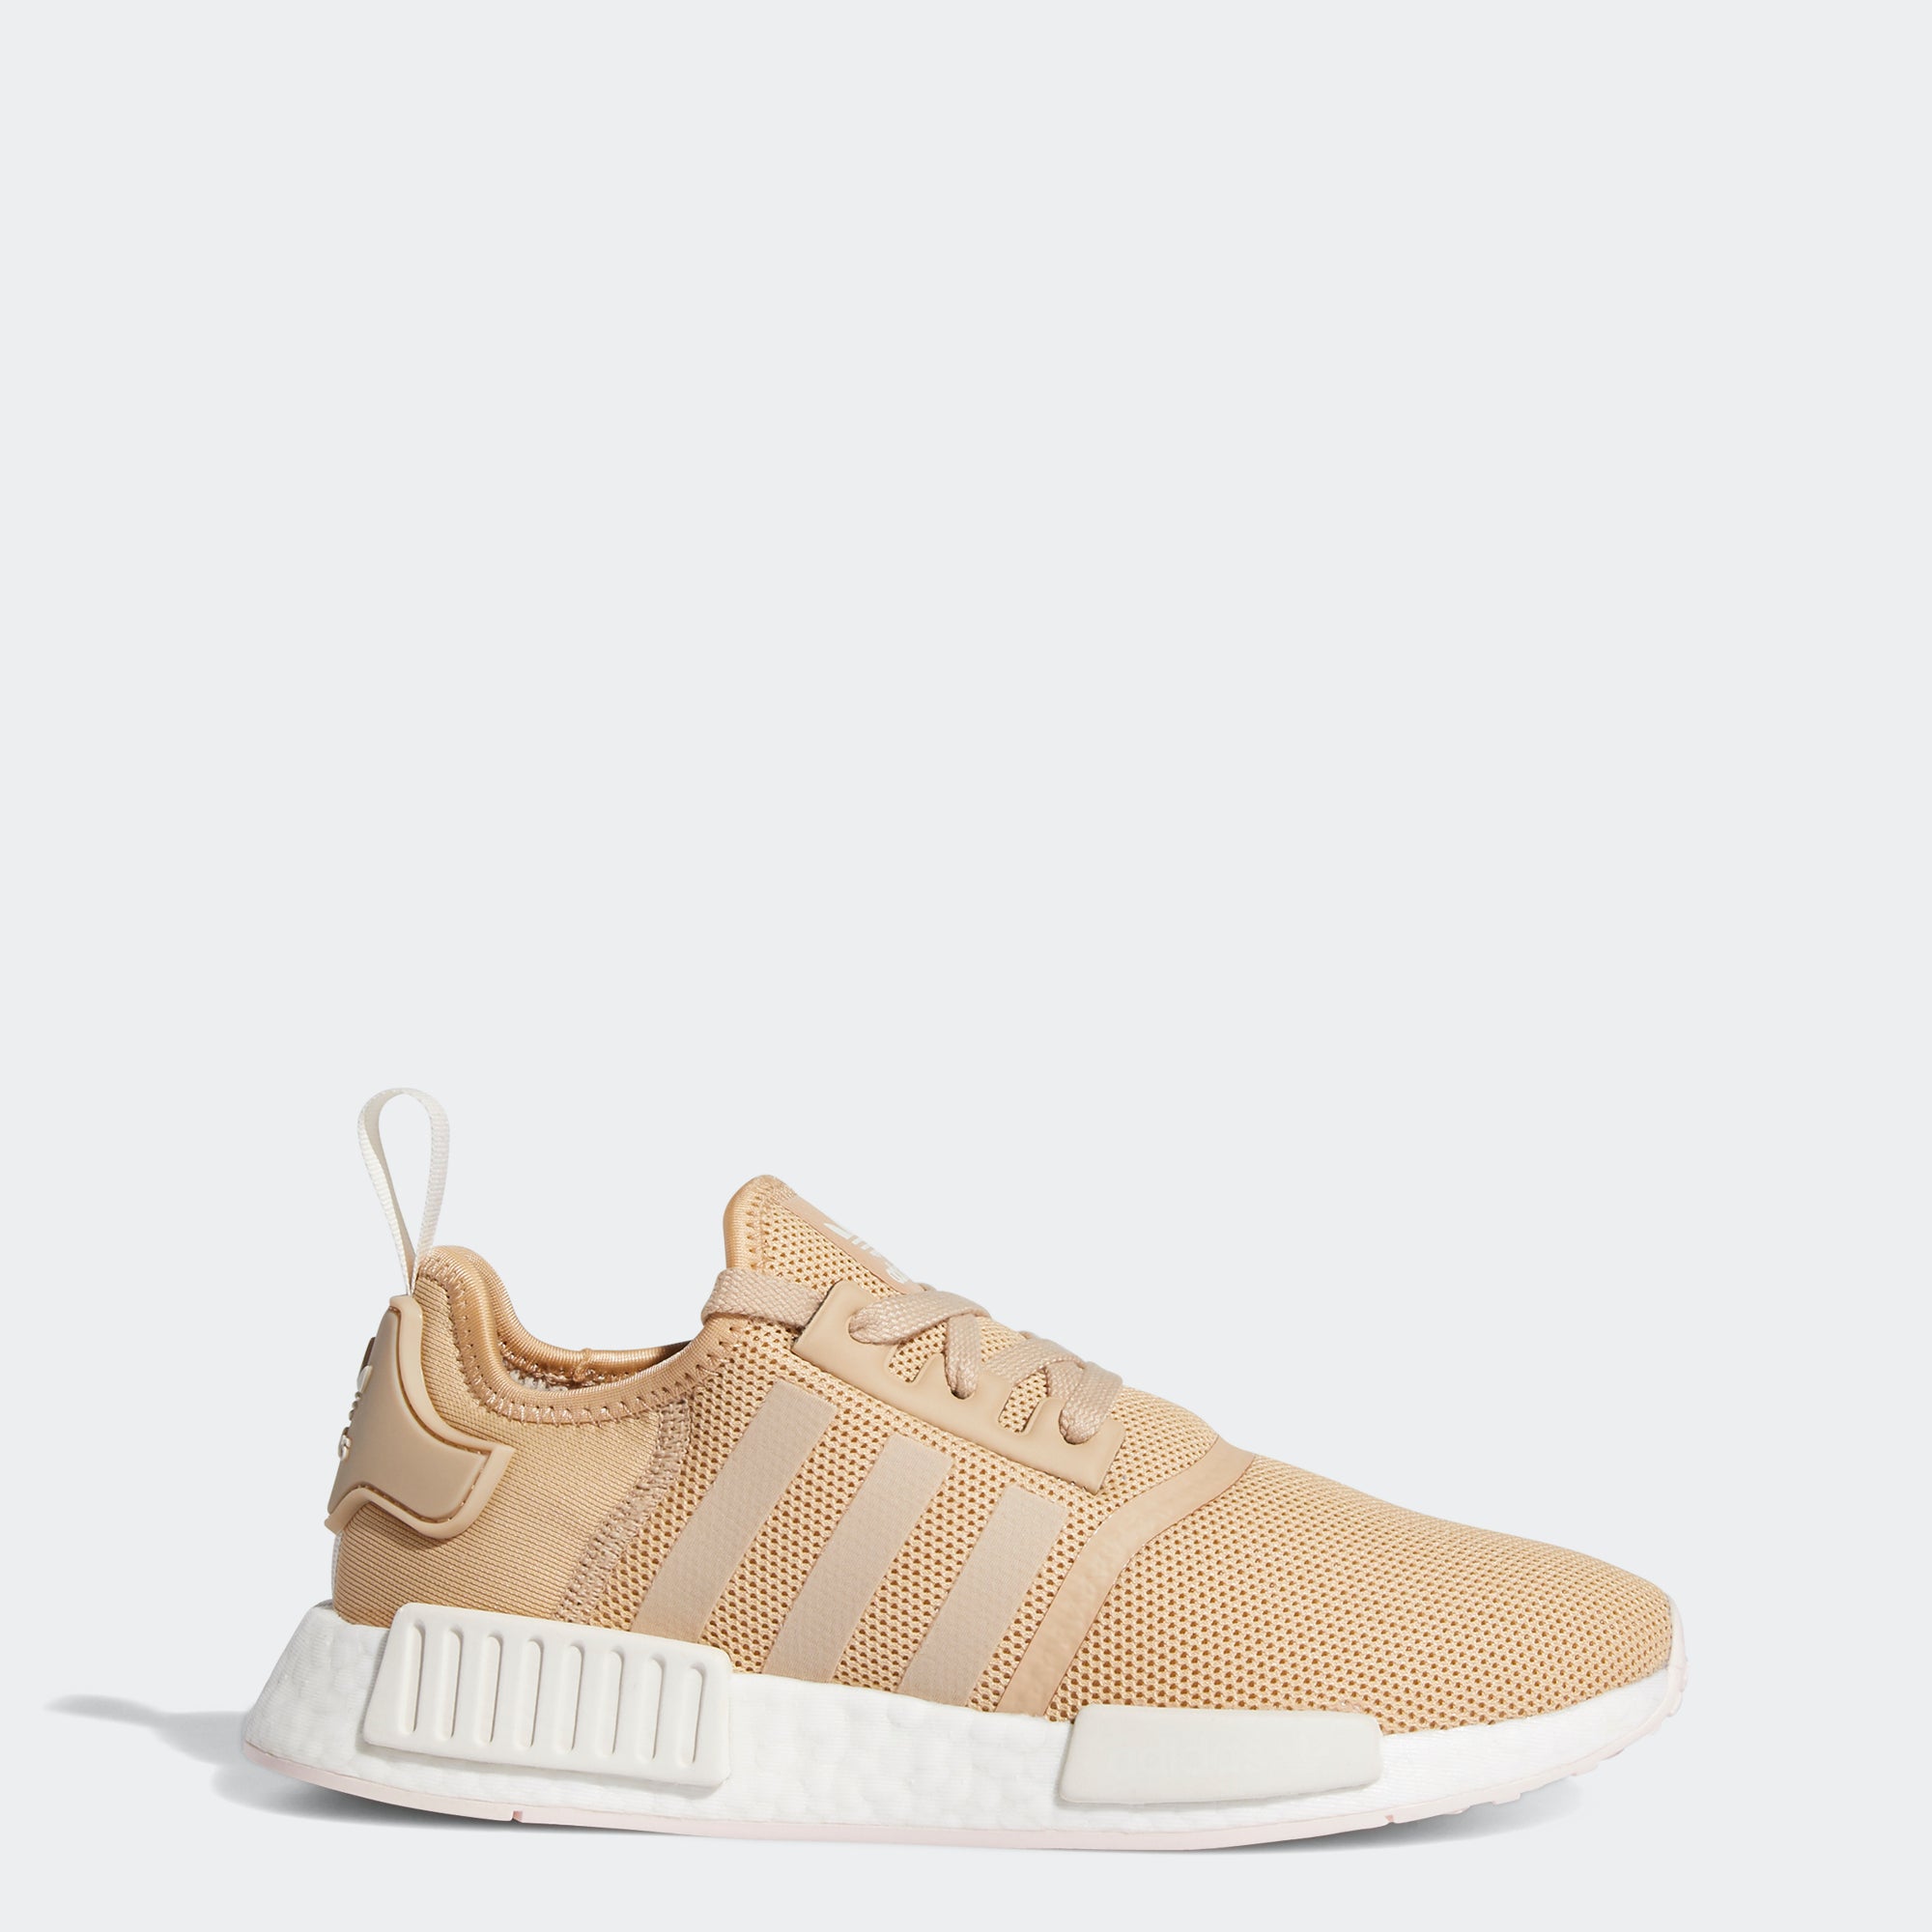 Women's adidas NMD_R1 Shoes Pale Nude 